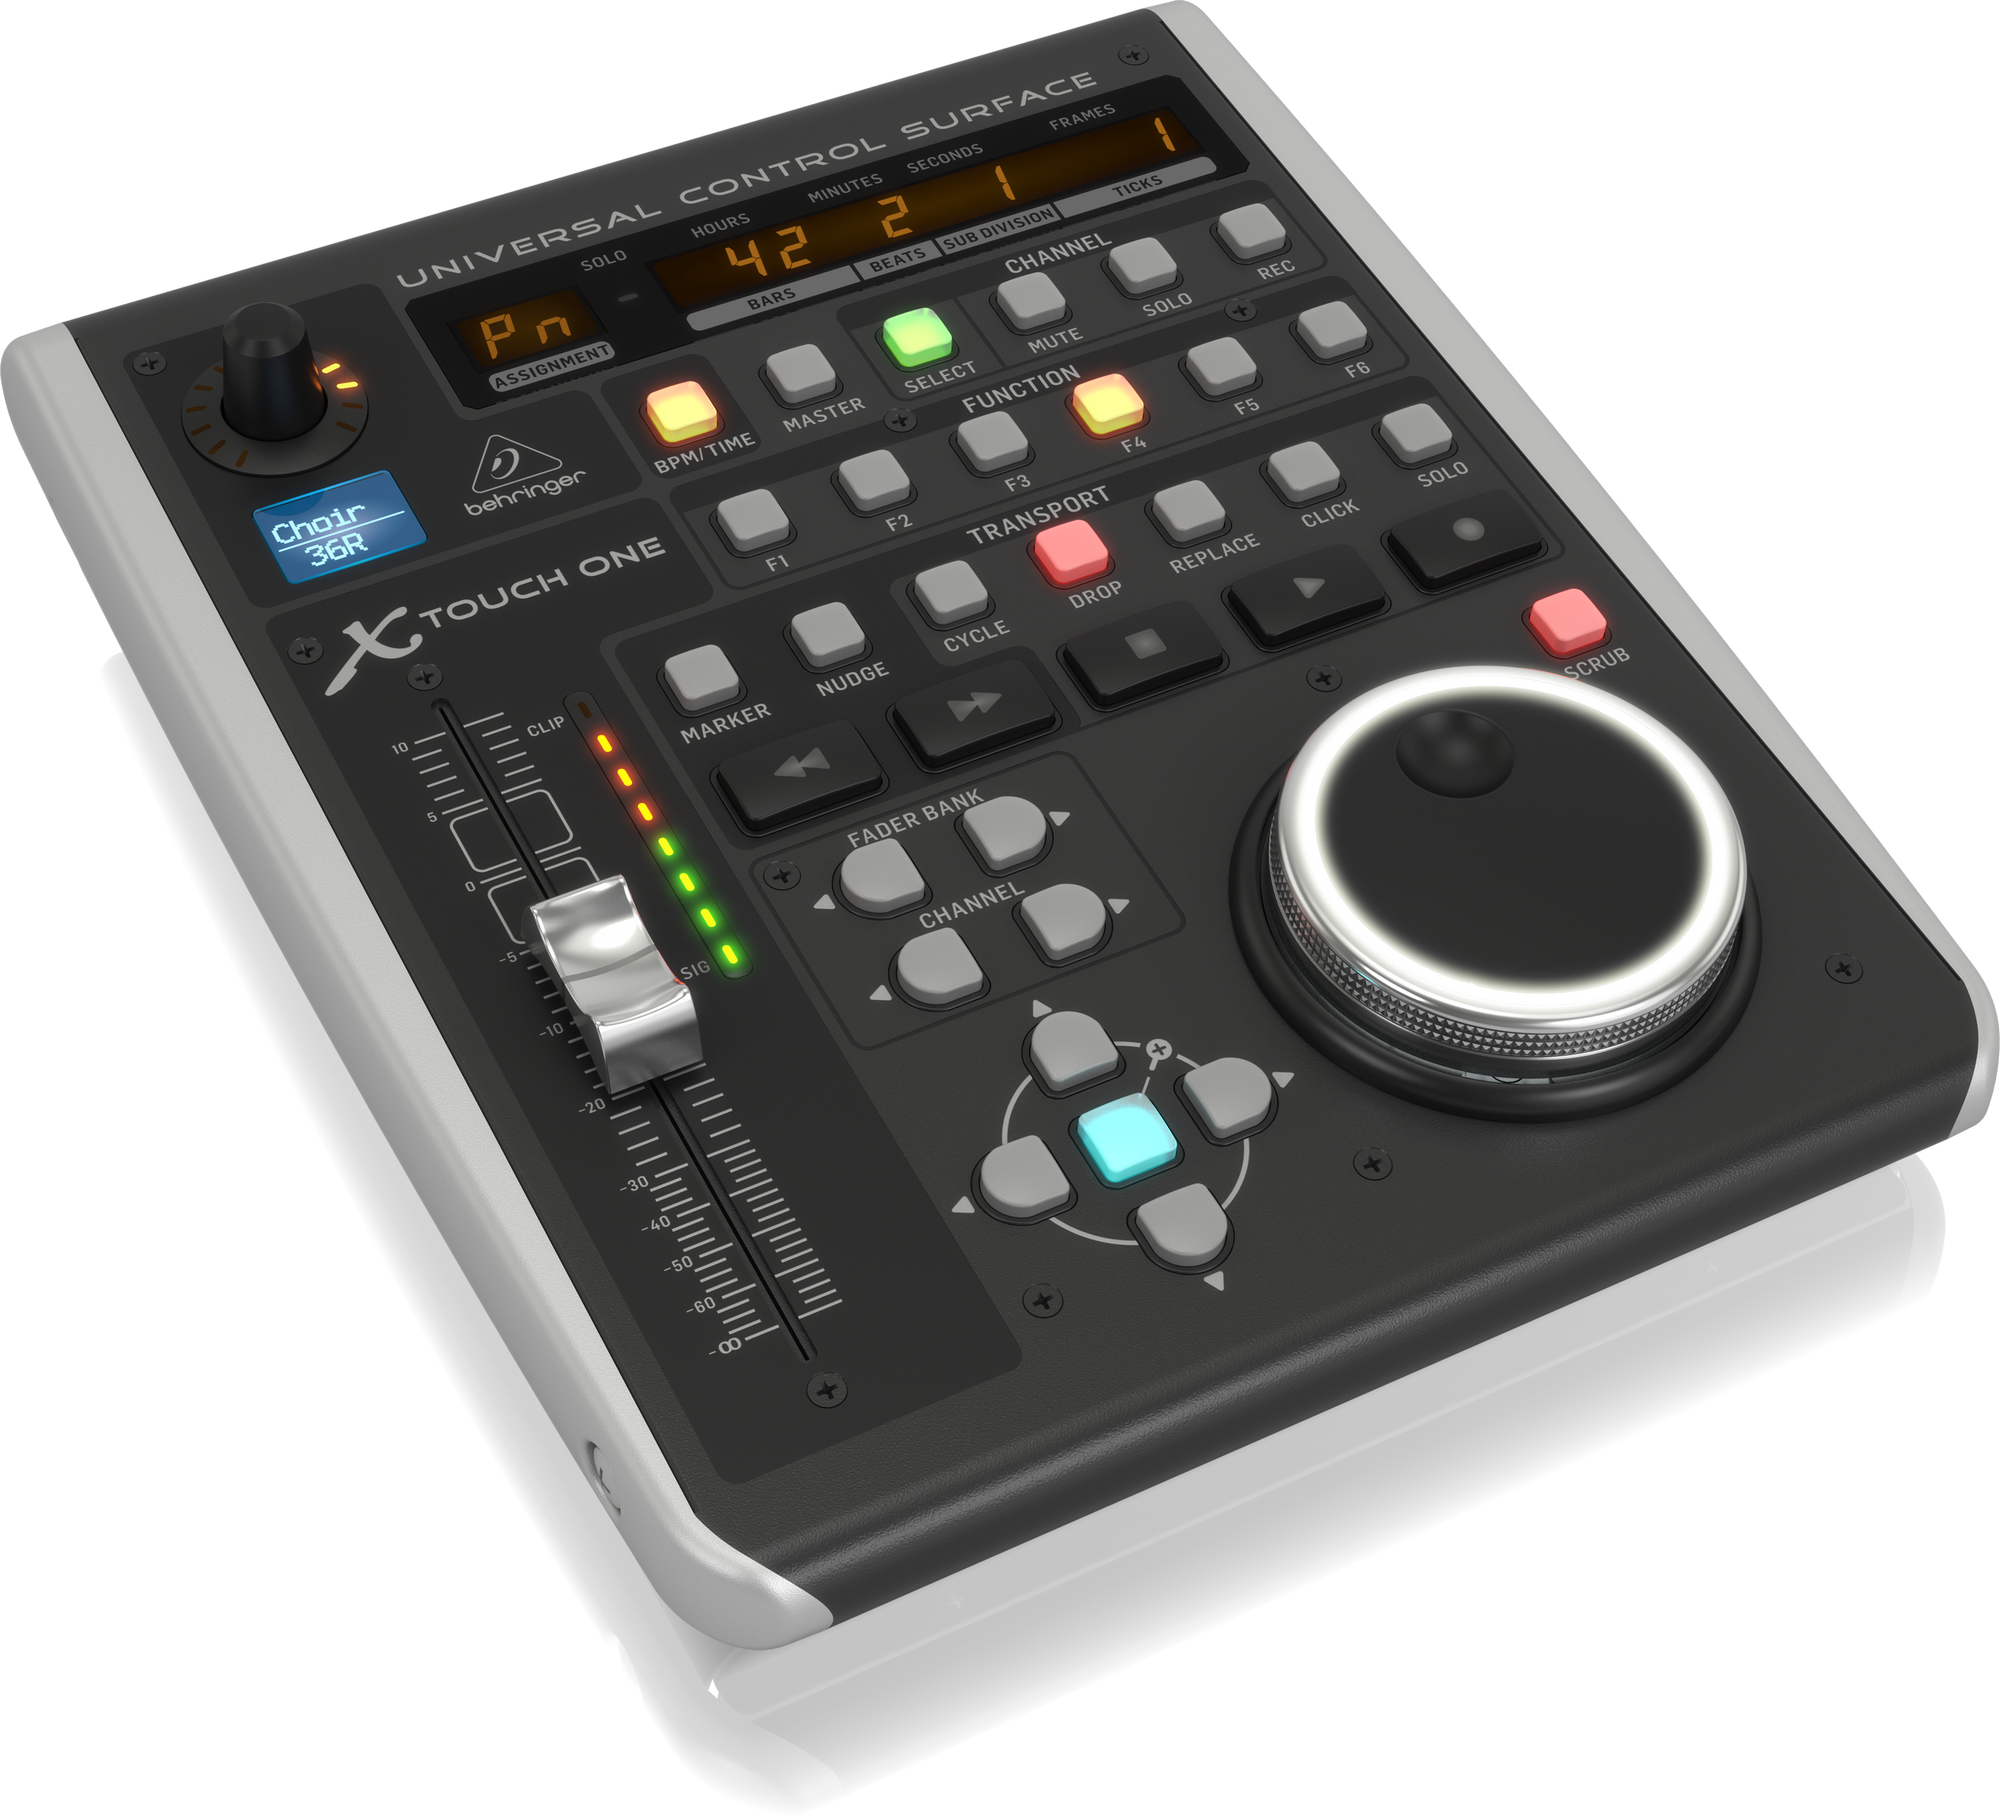 Behringer x touch control surface for home studio live setup Behringer Product X Touch One